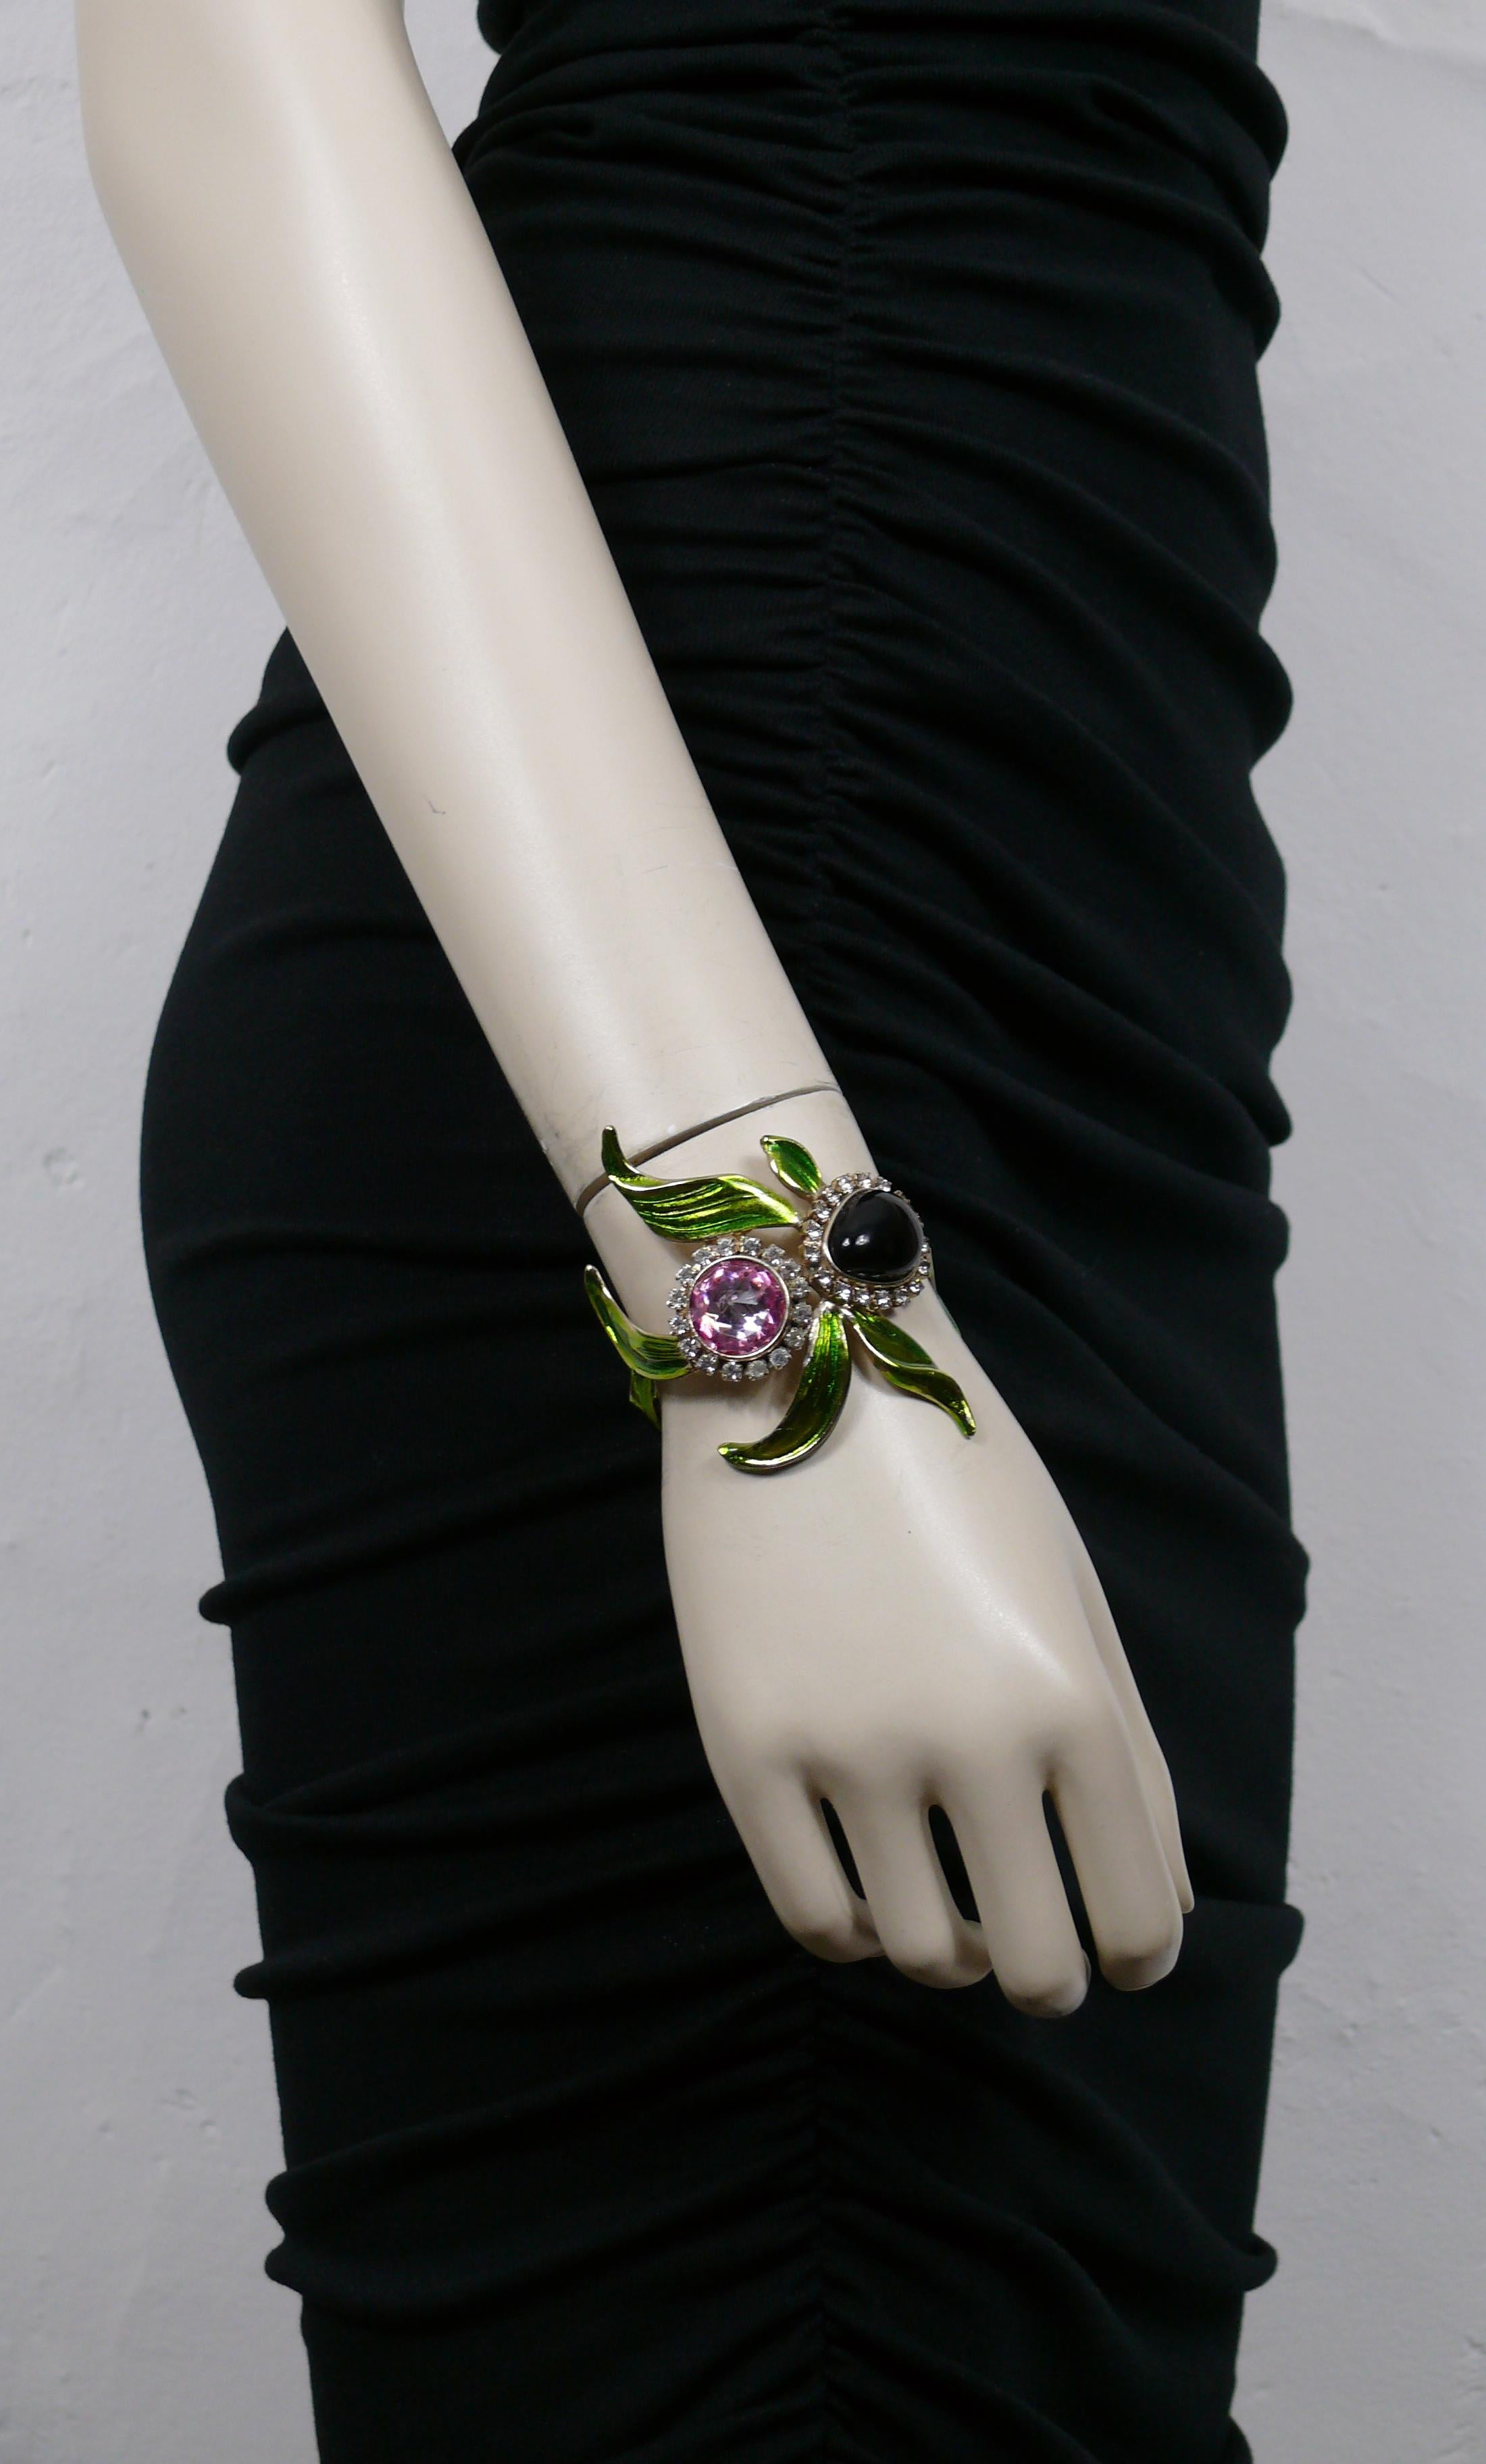 YVES SAINT LAURENT by TOM FORD pair of orchid cuff bracelets featuring a deep purple glass cabochon, pink and clear crystals, green enamel leaves in a light gold tone setting.

YVES SAINT LAURENT Spring-Summer 2004  Ready-To-Wear collection.
Runway